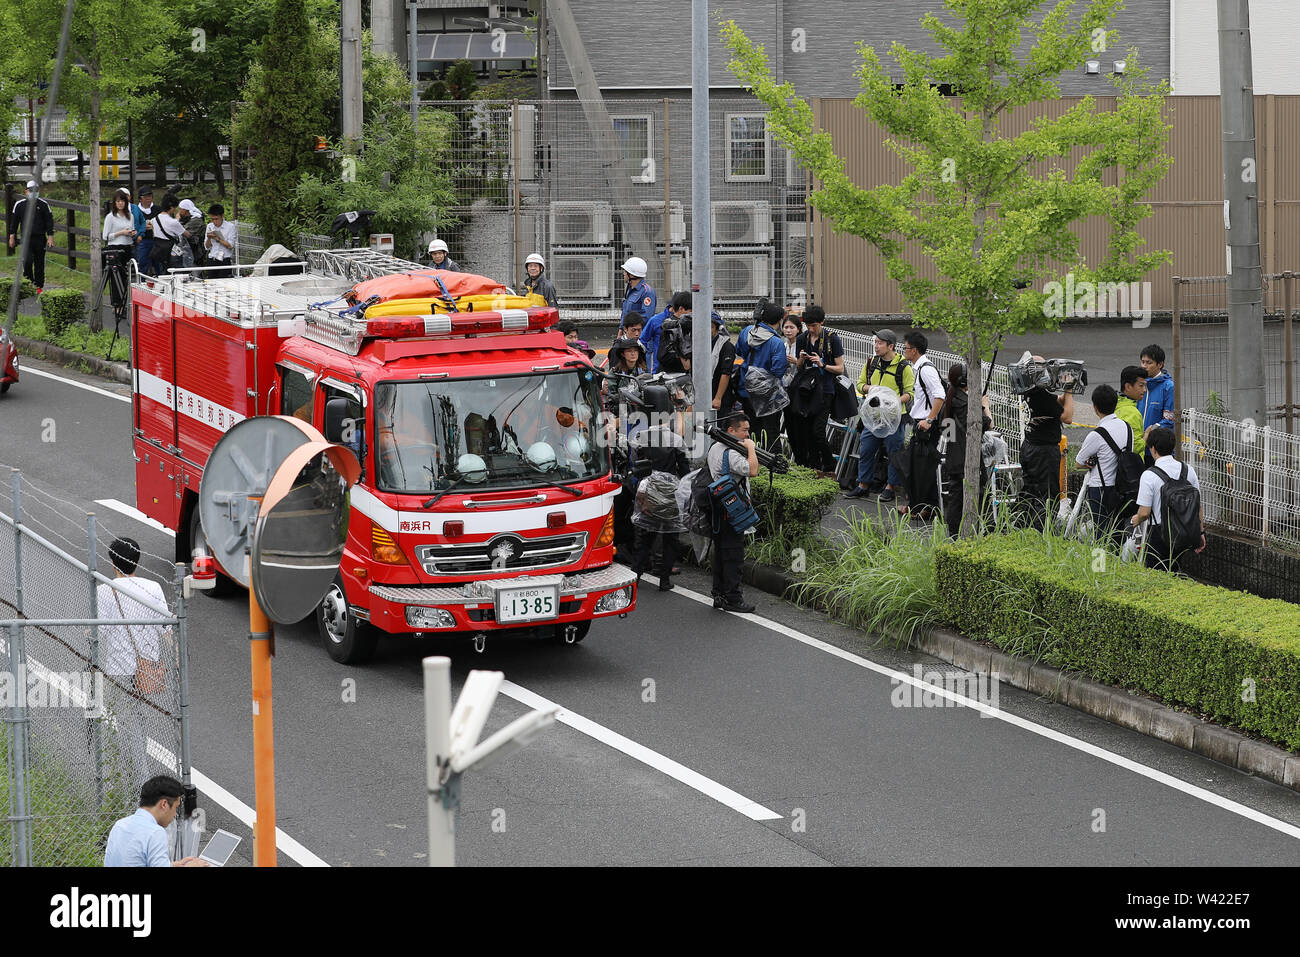 190719) -- KYOTO, July 19, 2019 (Xinhua) -- A fire engine passes by waiting  journalists near a Kyoto Animation studio building after an arson attack in  Kyoto, Japan, July 19, 2019. The